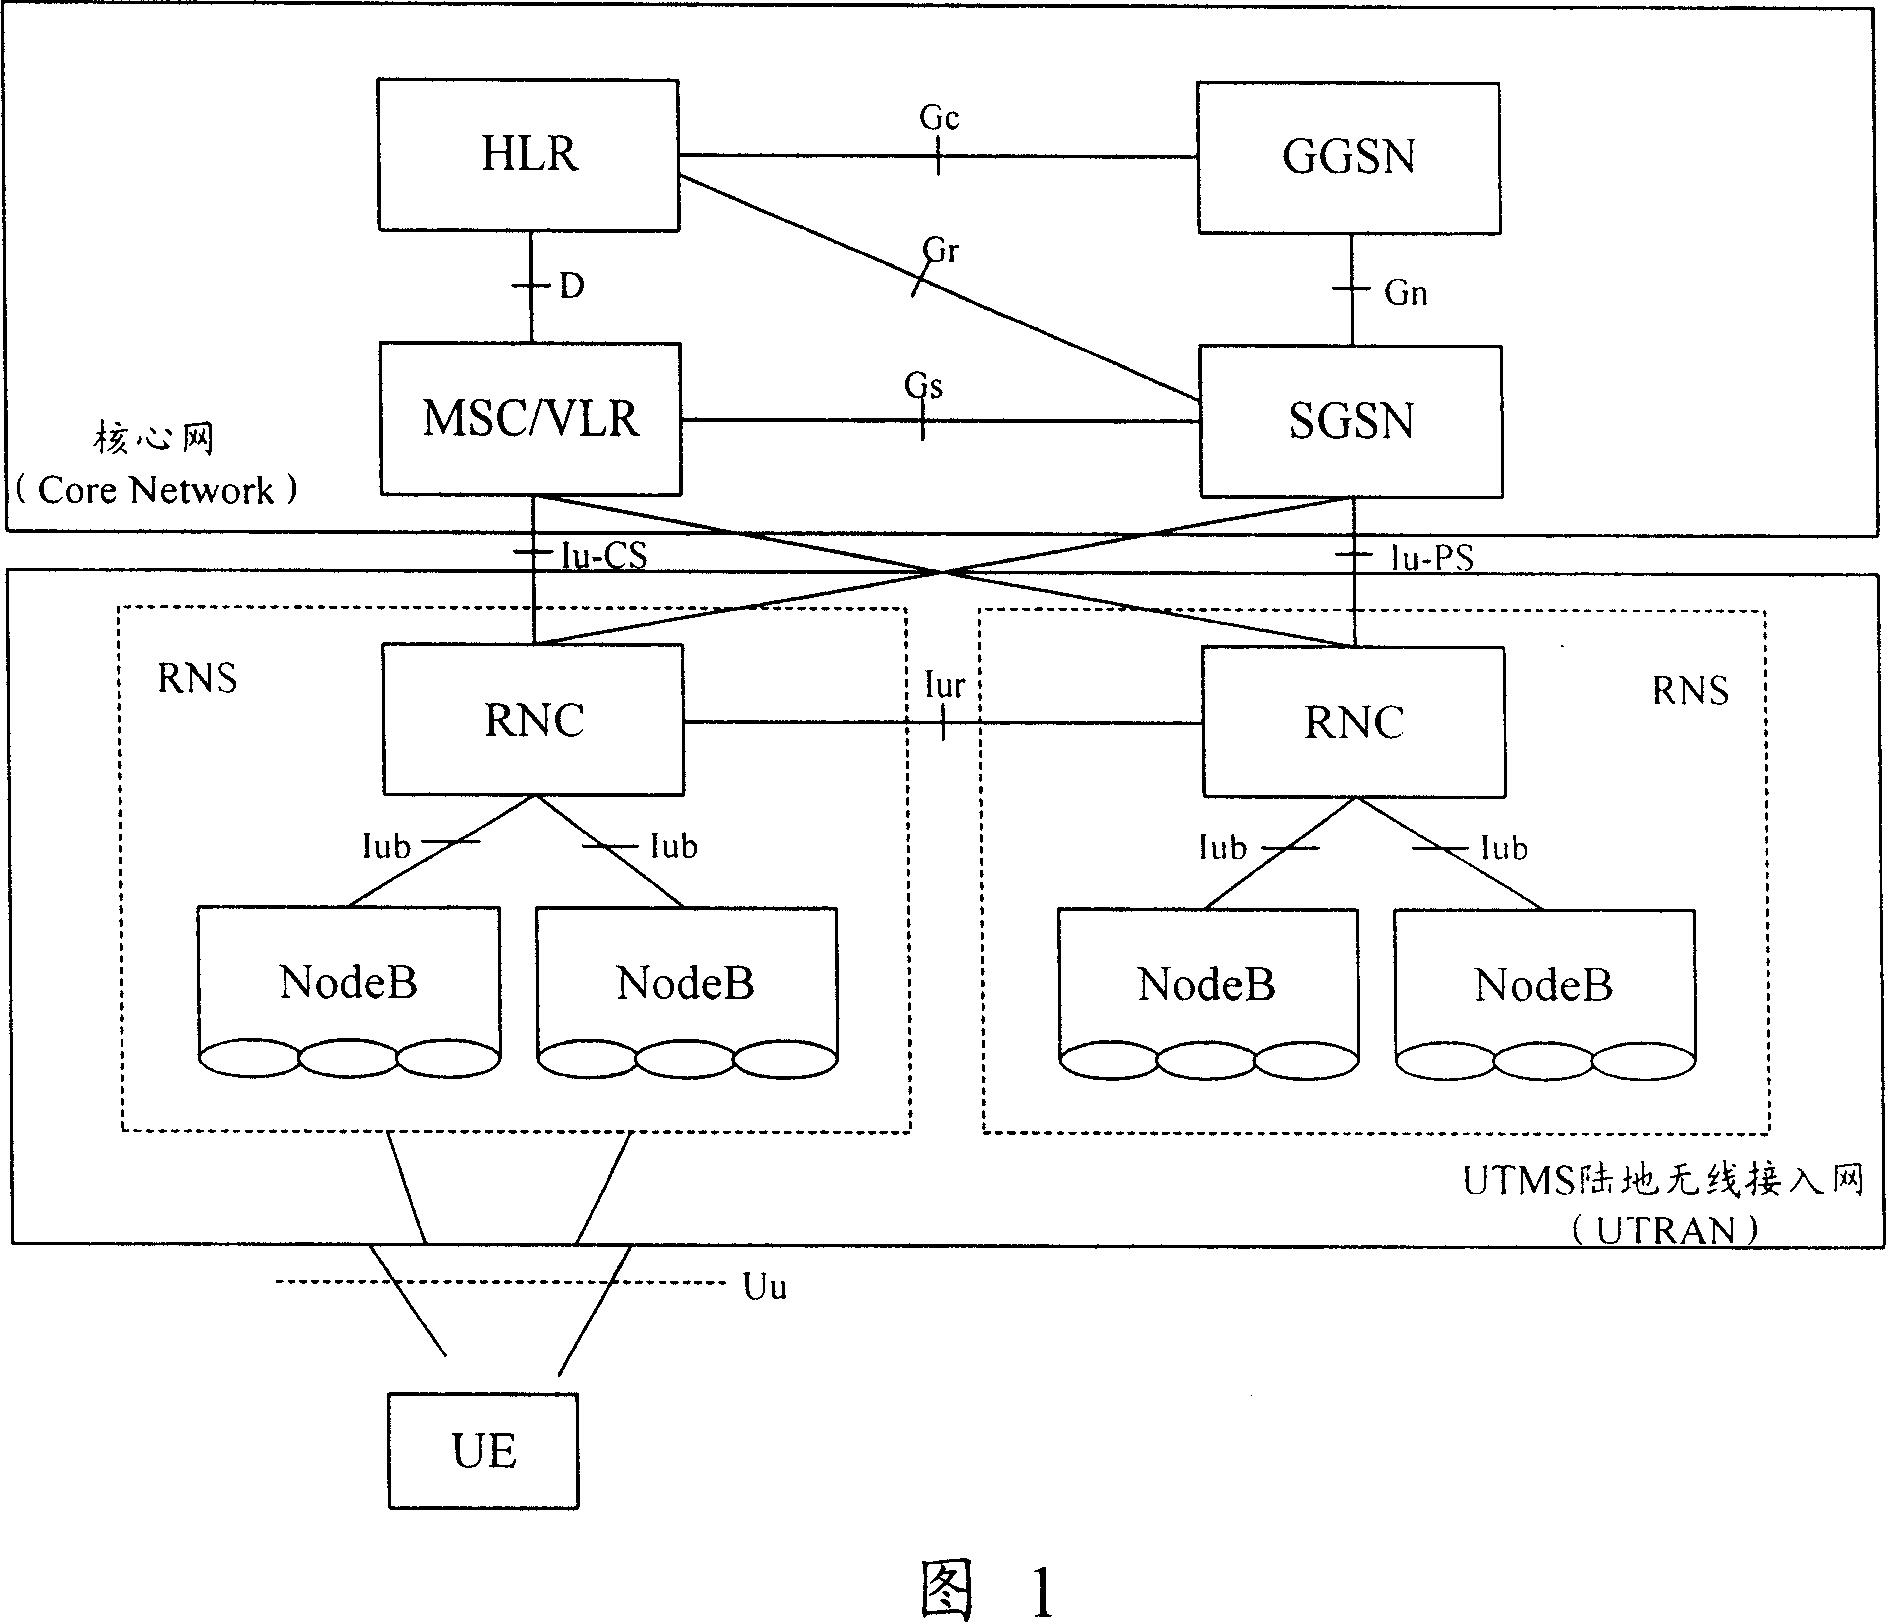 A method for correct service network choice of the user terminal